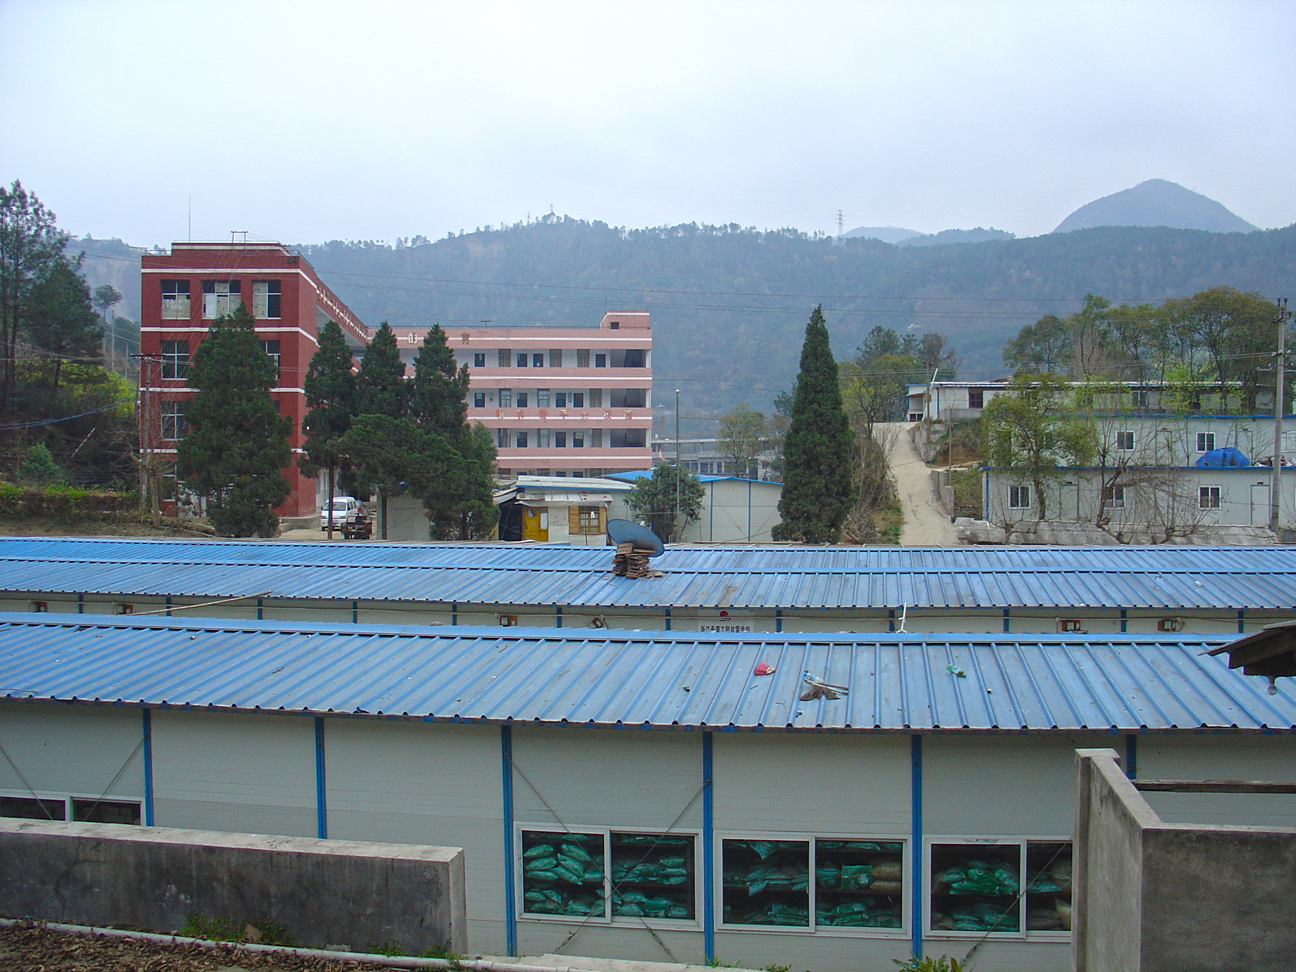 The old Qingchuan Vocational High School - Only one teaching building was not destroyed through the earthquake. The blue buildings used to be the emergency shelters.